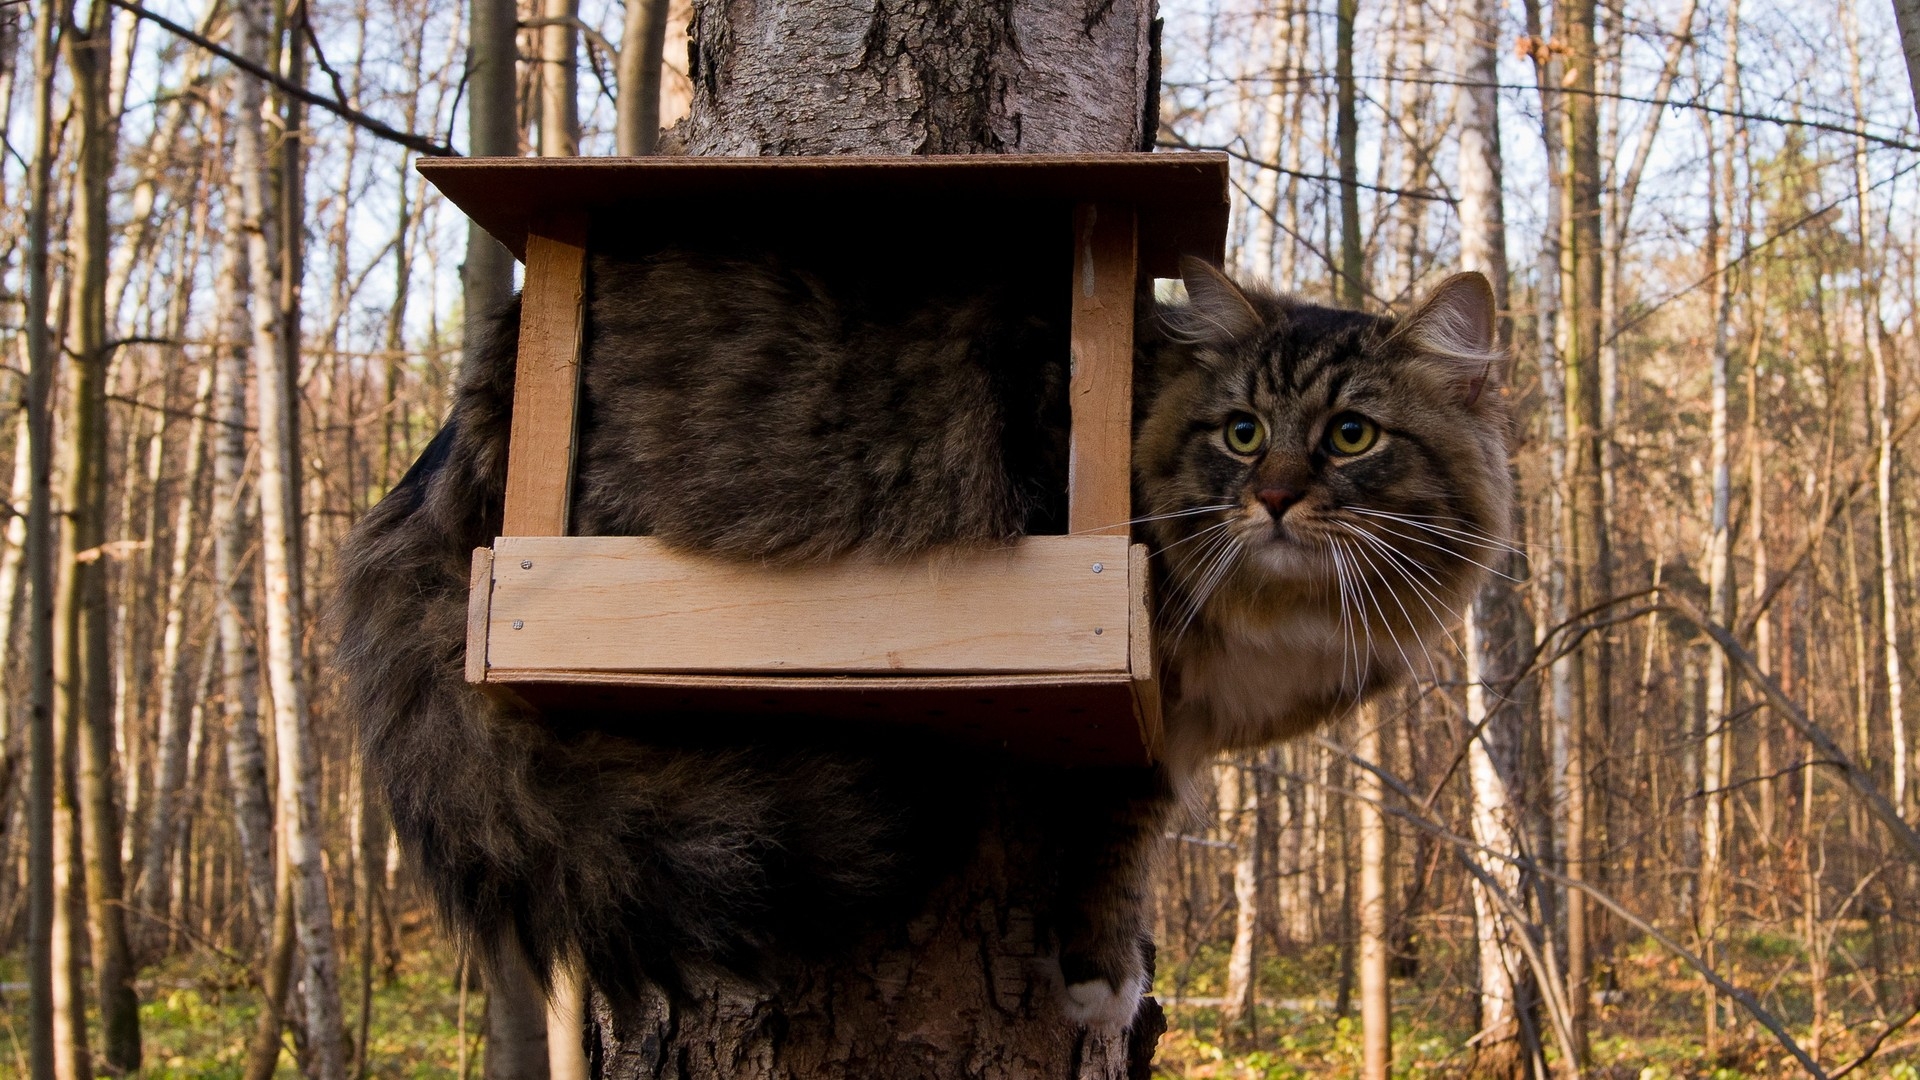 Download Wallpaper 1920x1080 cat, birdhouse, furry, funny, situation ...